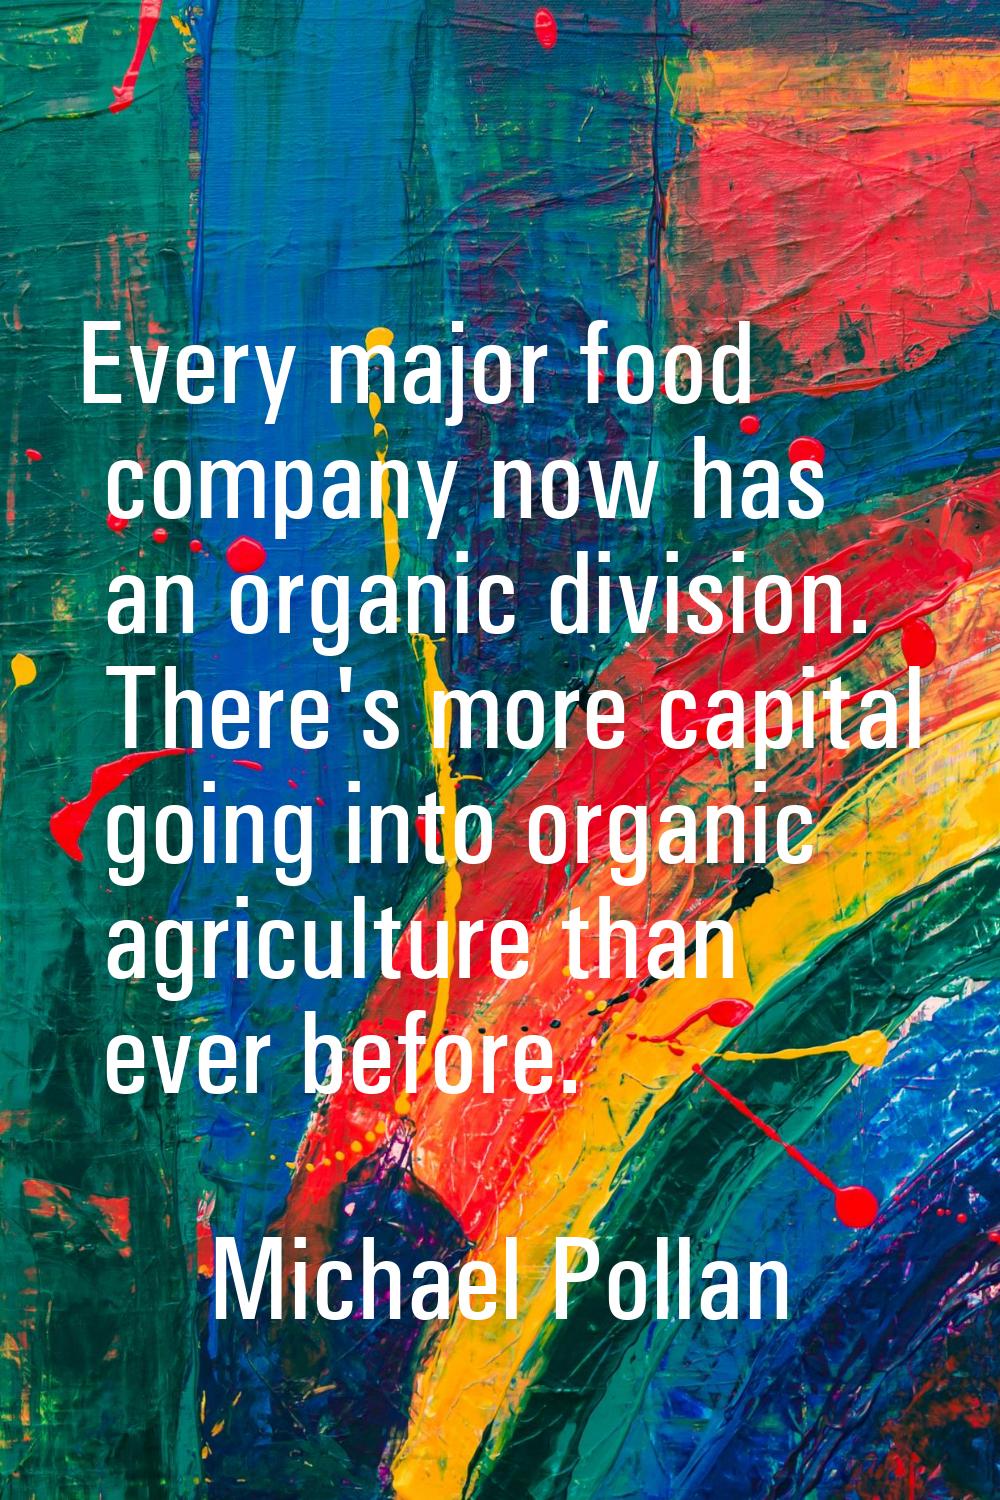 Every major food company now has an organic division. There's more capital going into organic agric